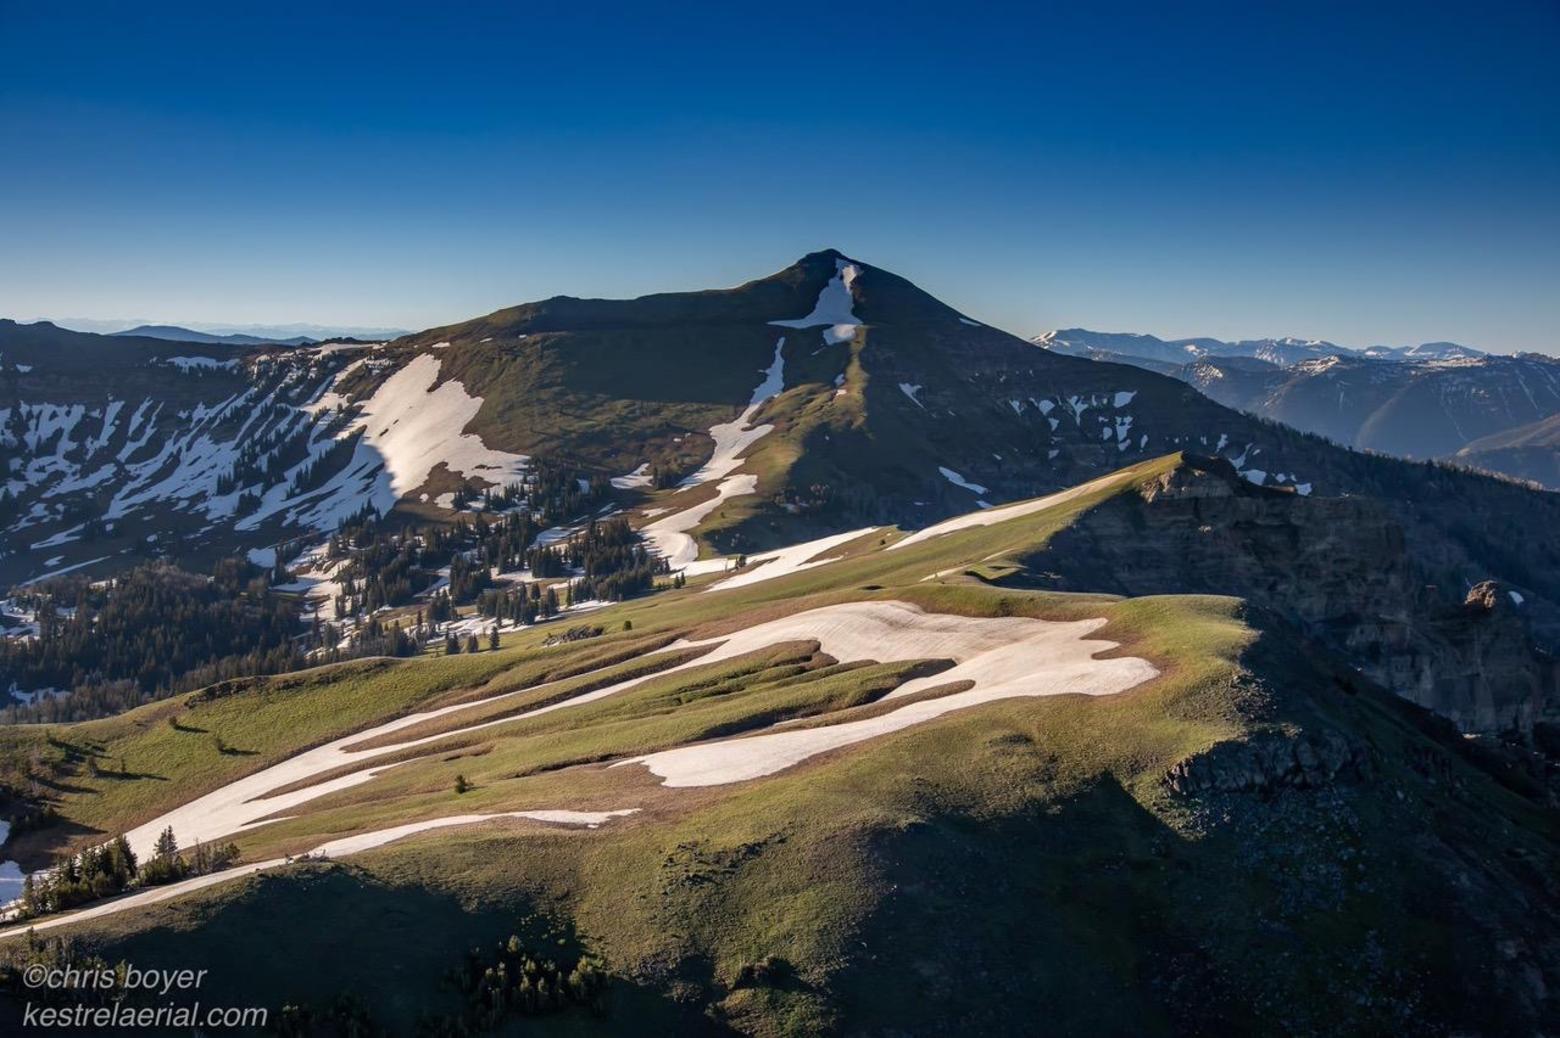 The rugged and unmarred ridge of the Gallatin Range that rises east of Big Sky.  It's topography like this that prompted Wyoming Congressman Teno Roncalio to refer to Greater Yellowstone as "the Alaska of the Lower 48 states." Photo by Chris Boyer (kestrelaerial.com)